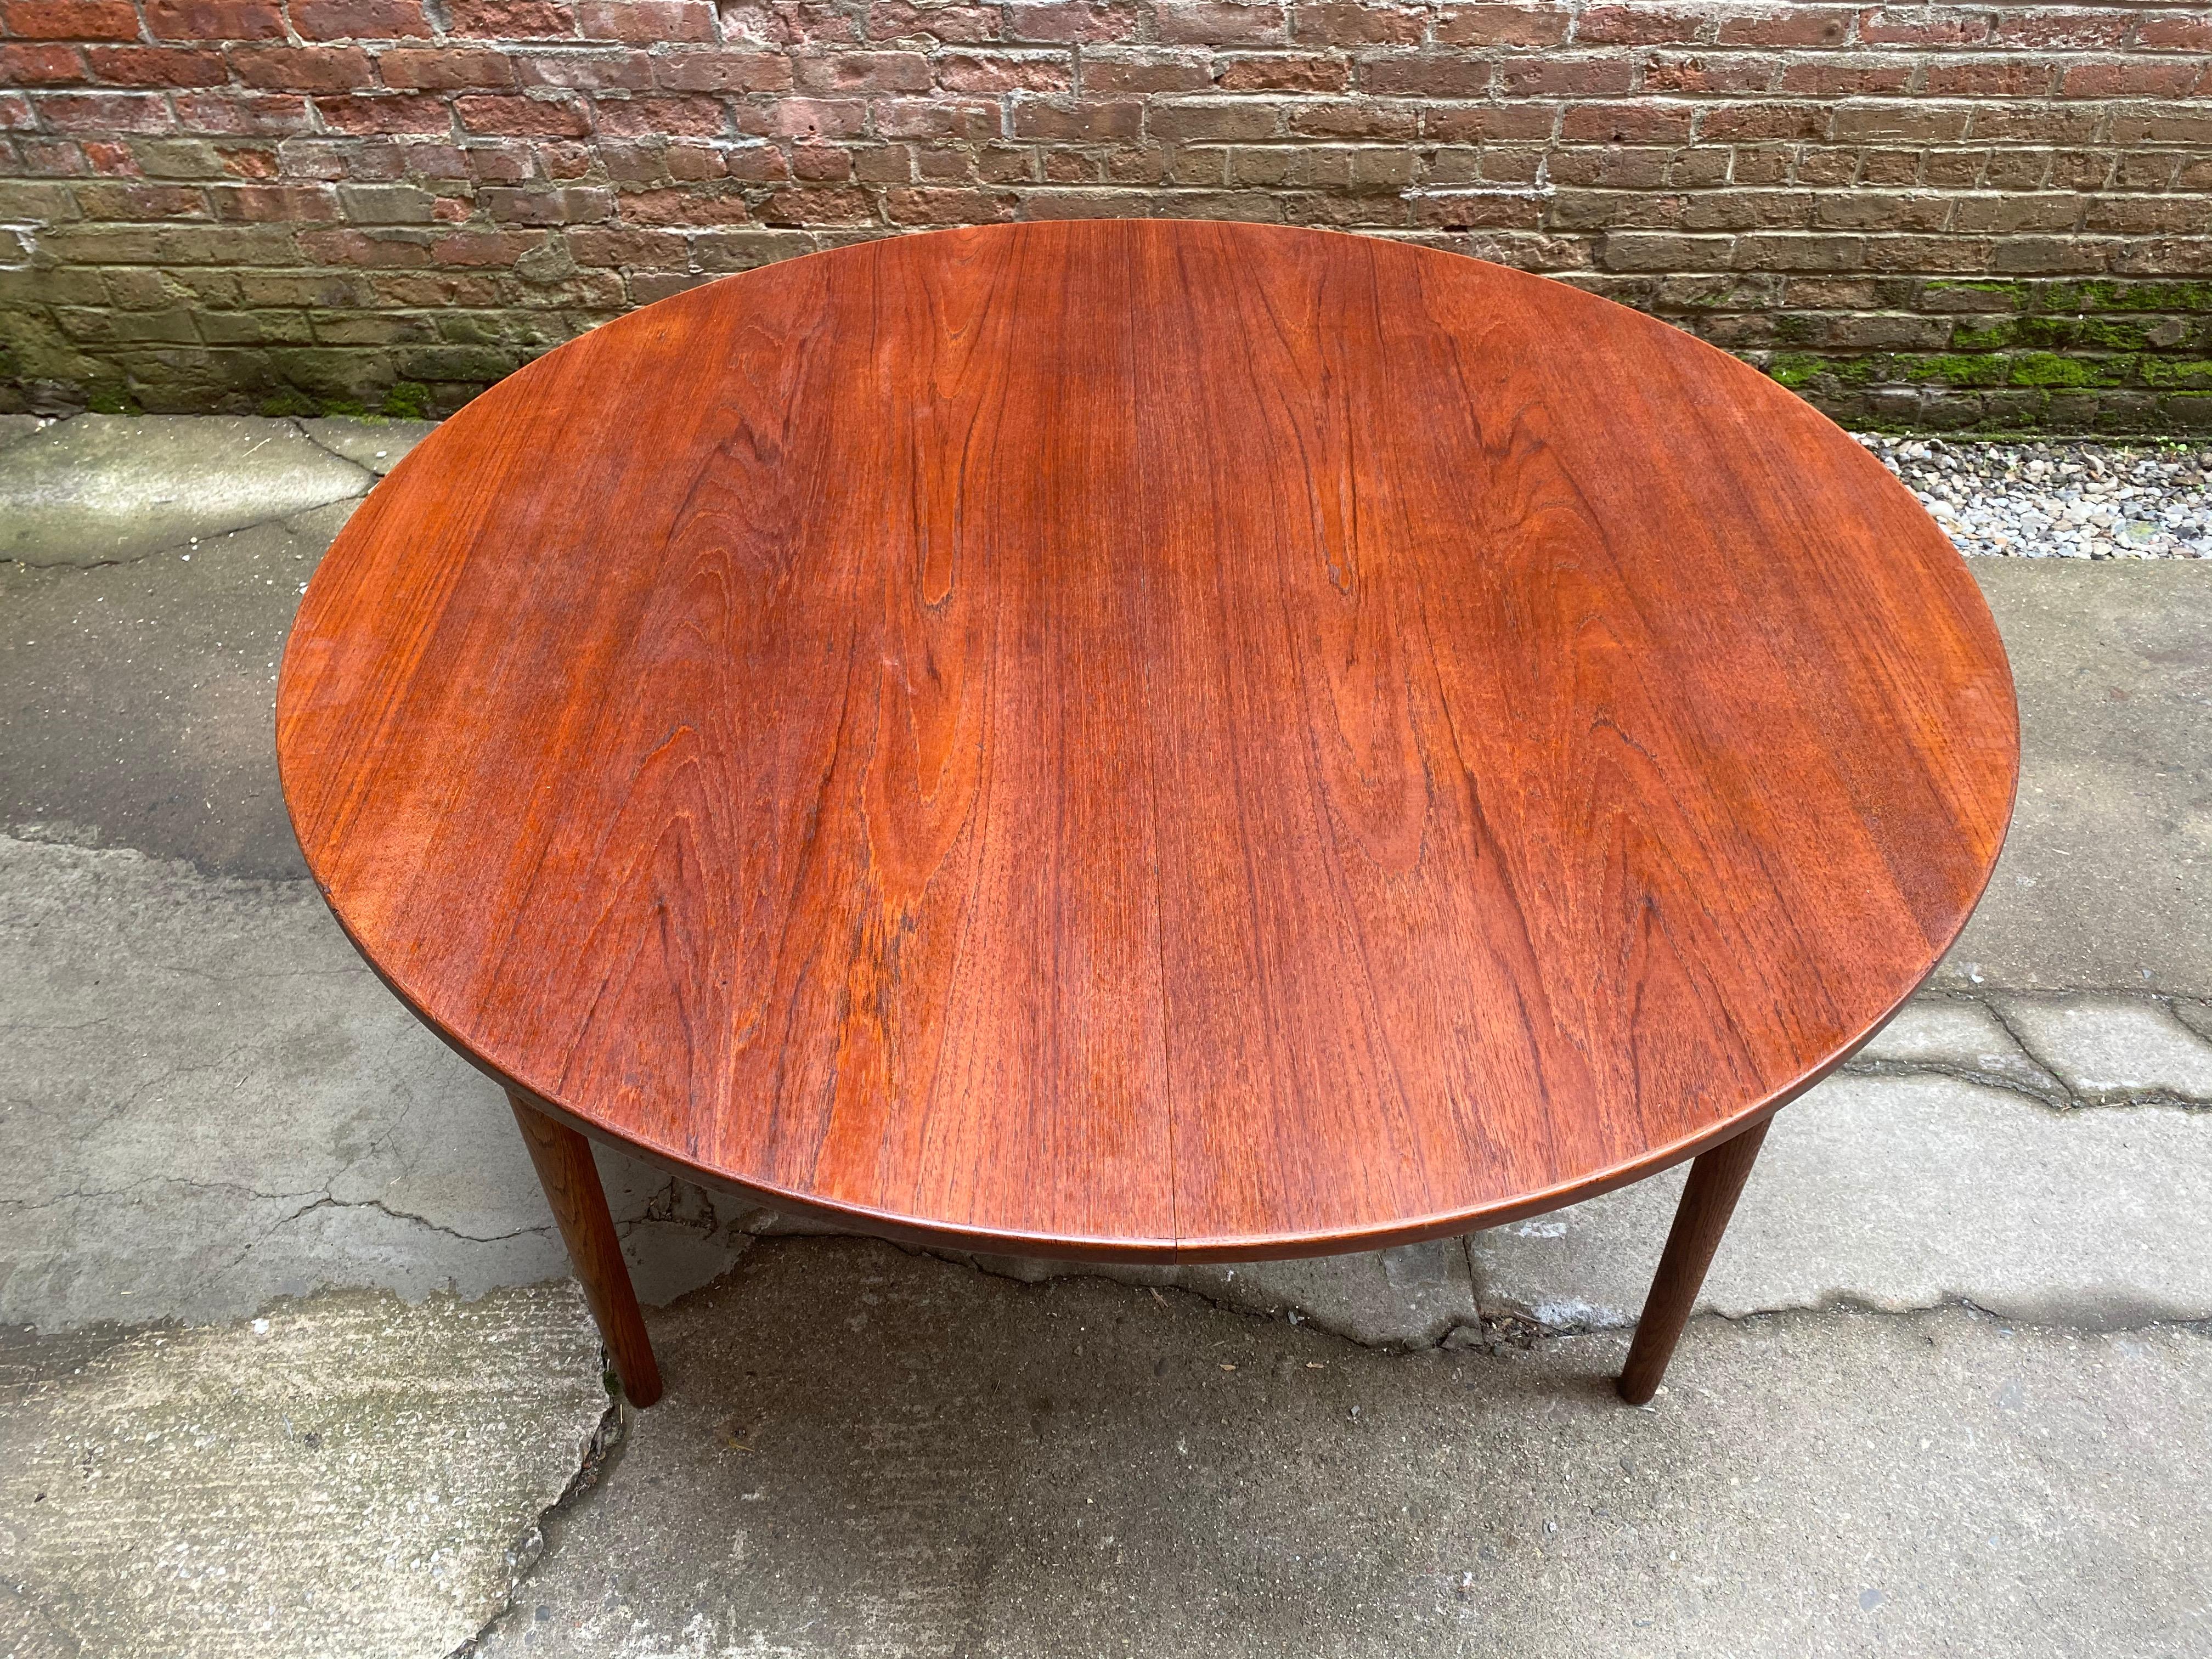 Scandinavian design teak and oak dining table with one large leaf, circa 1960-1965. Teak round top with tapered solid oak legs. Freshly oiled. Good condition overall with the runners sliding easily, some minor light scratches and some bruising on